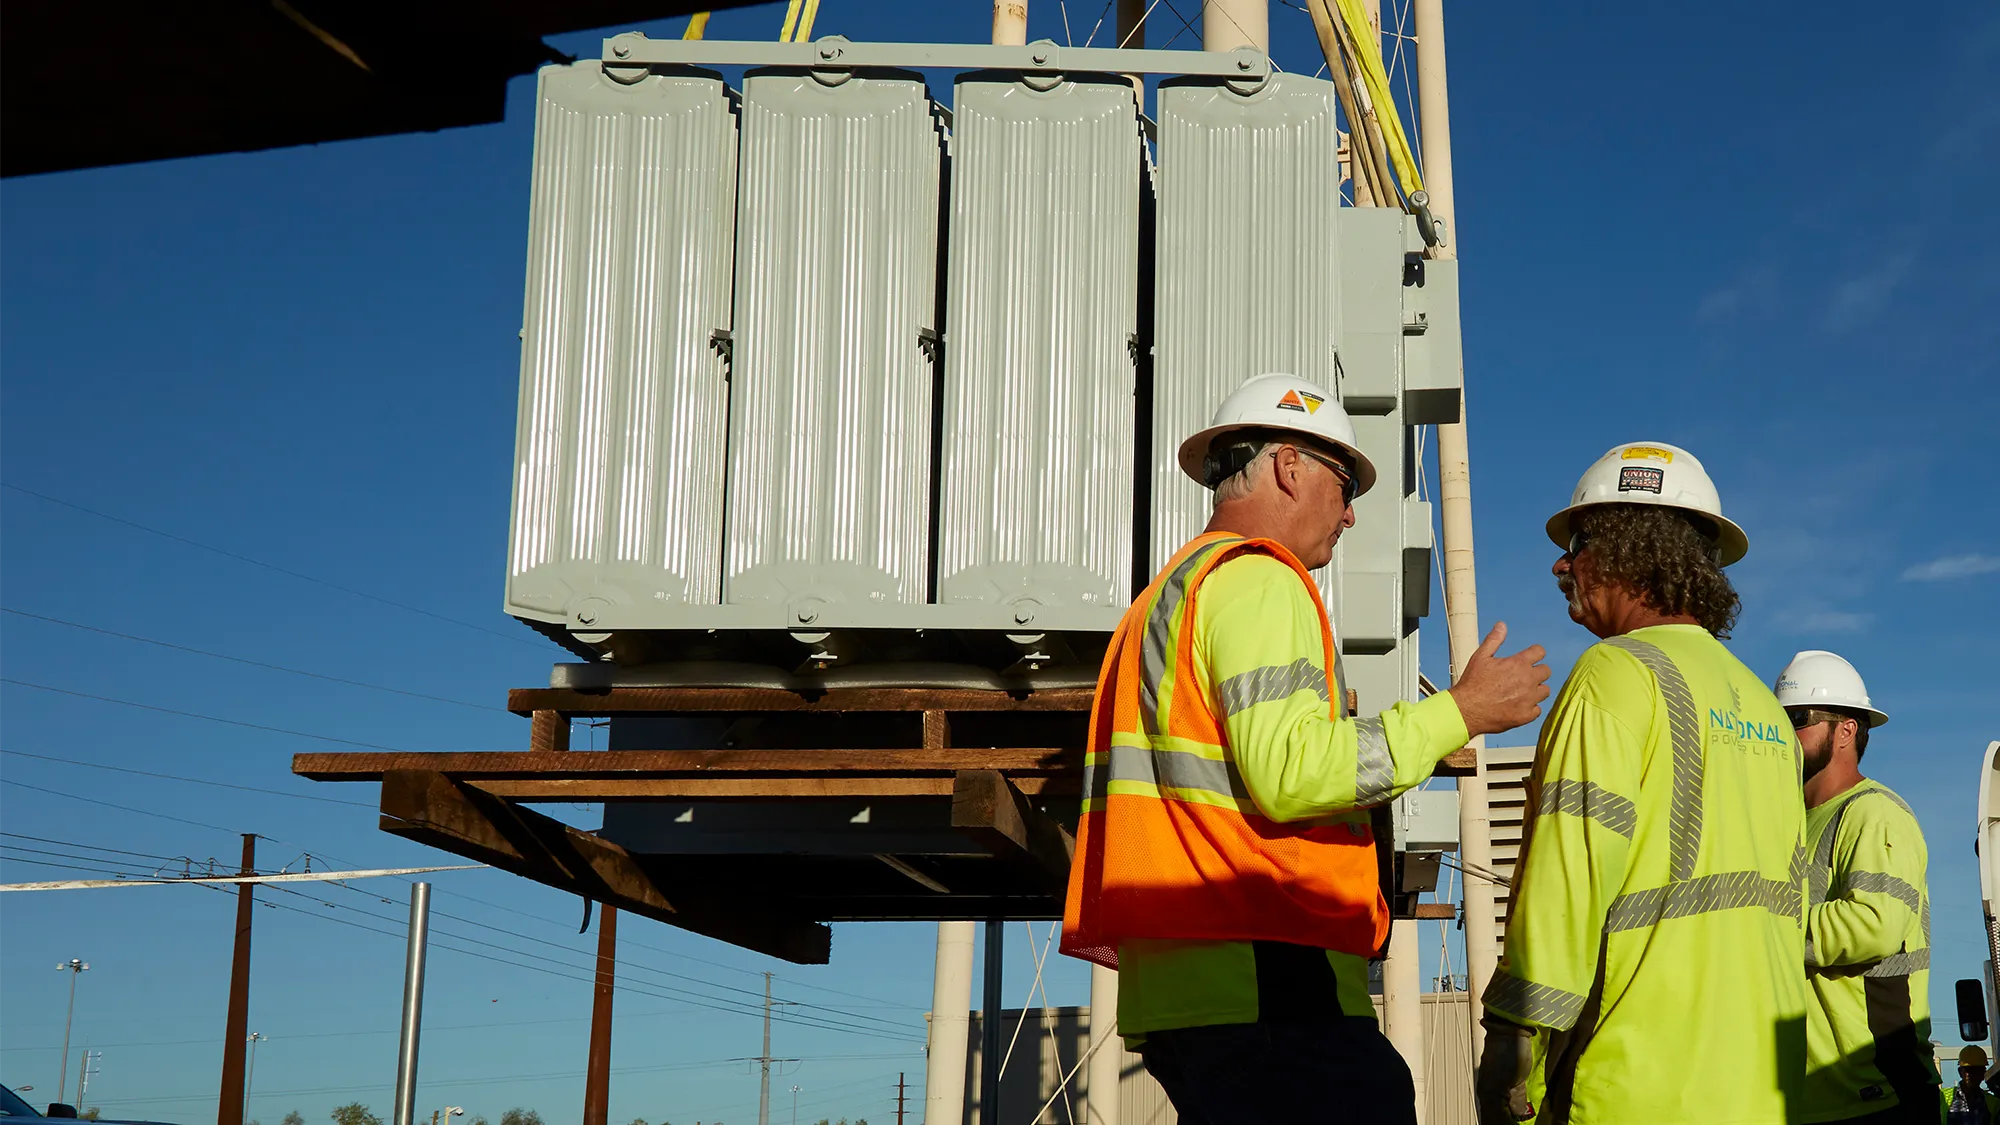 National Powerline supervisor talking to a worker while a substation is hoisted in the background.